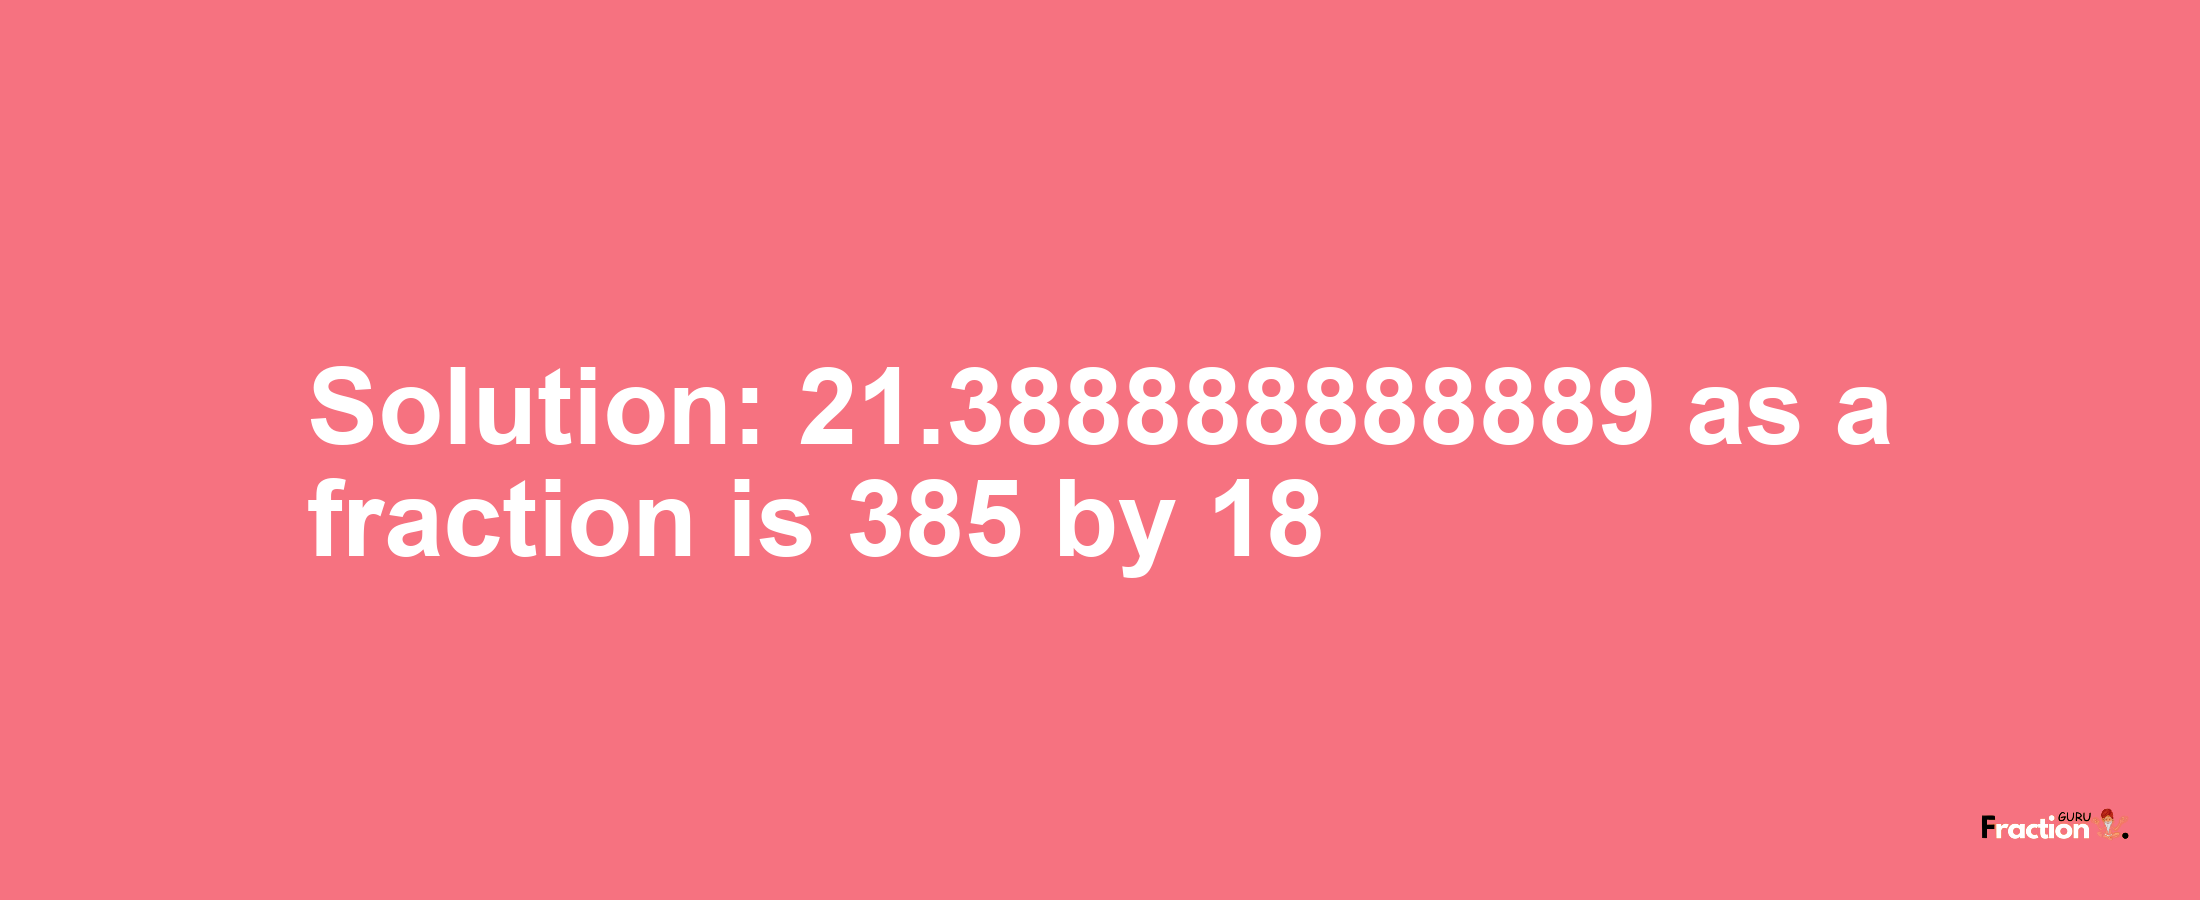 Solution:21.388888888889 as a fraction is 385/18